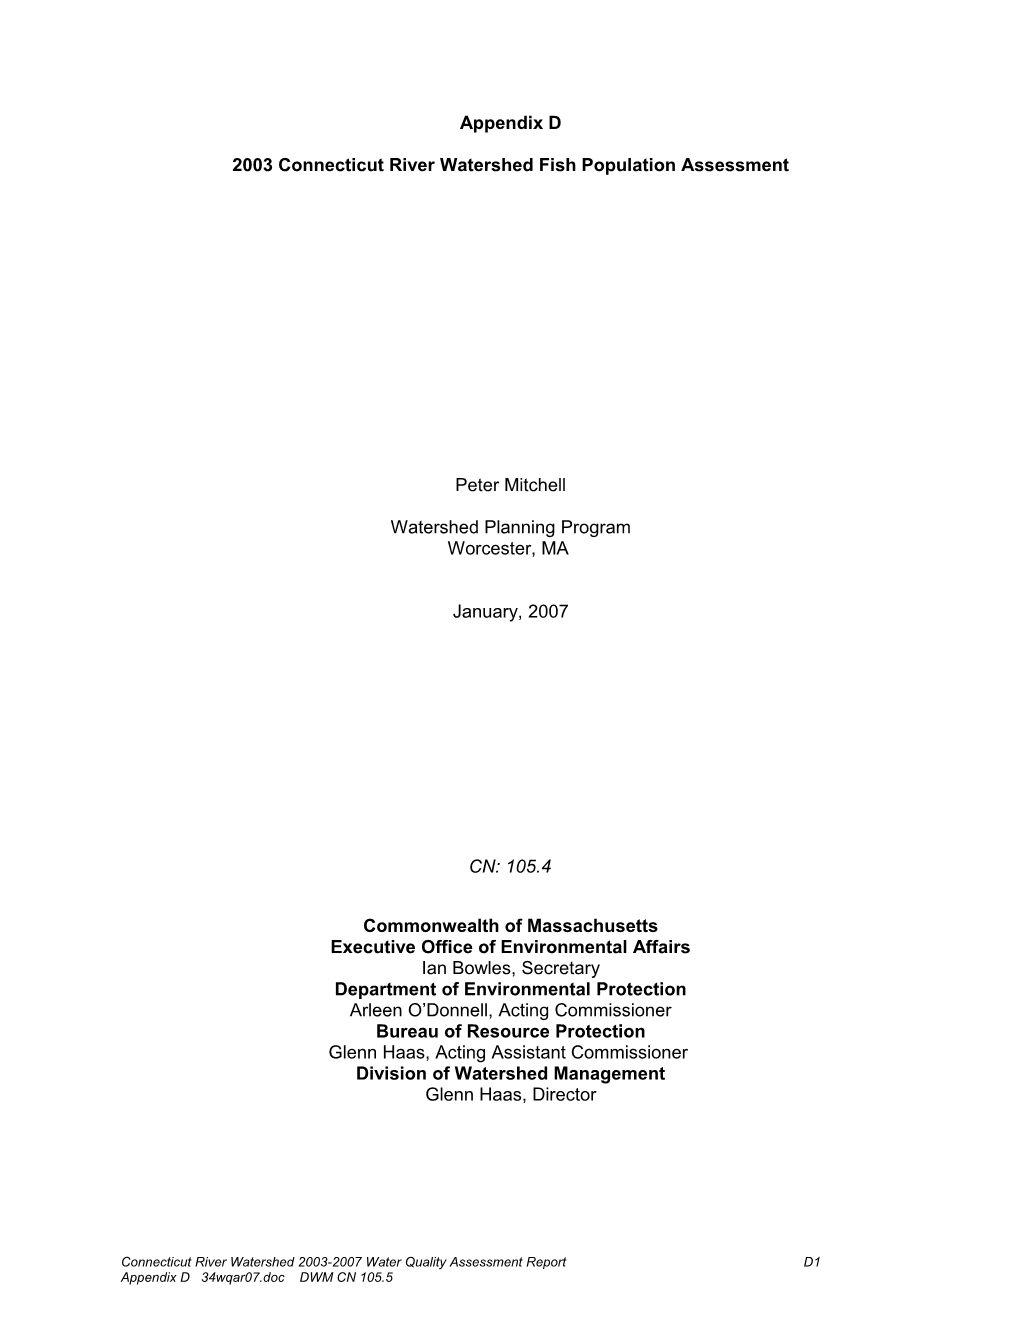 2003 Connecticut River Watershed Fish Population Assessment